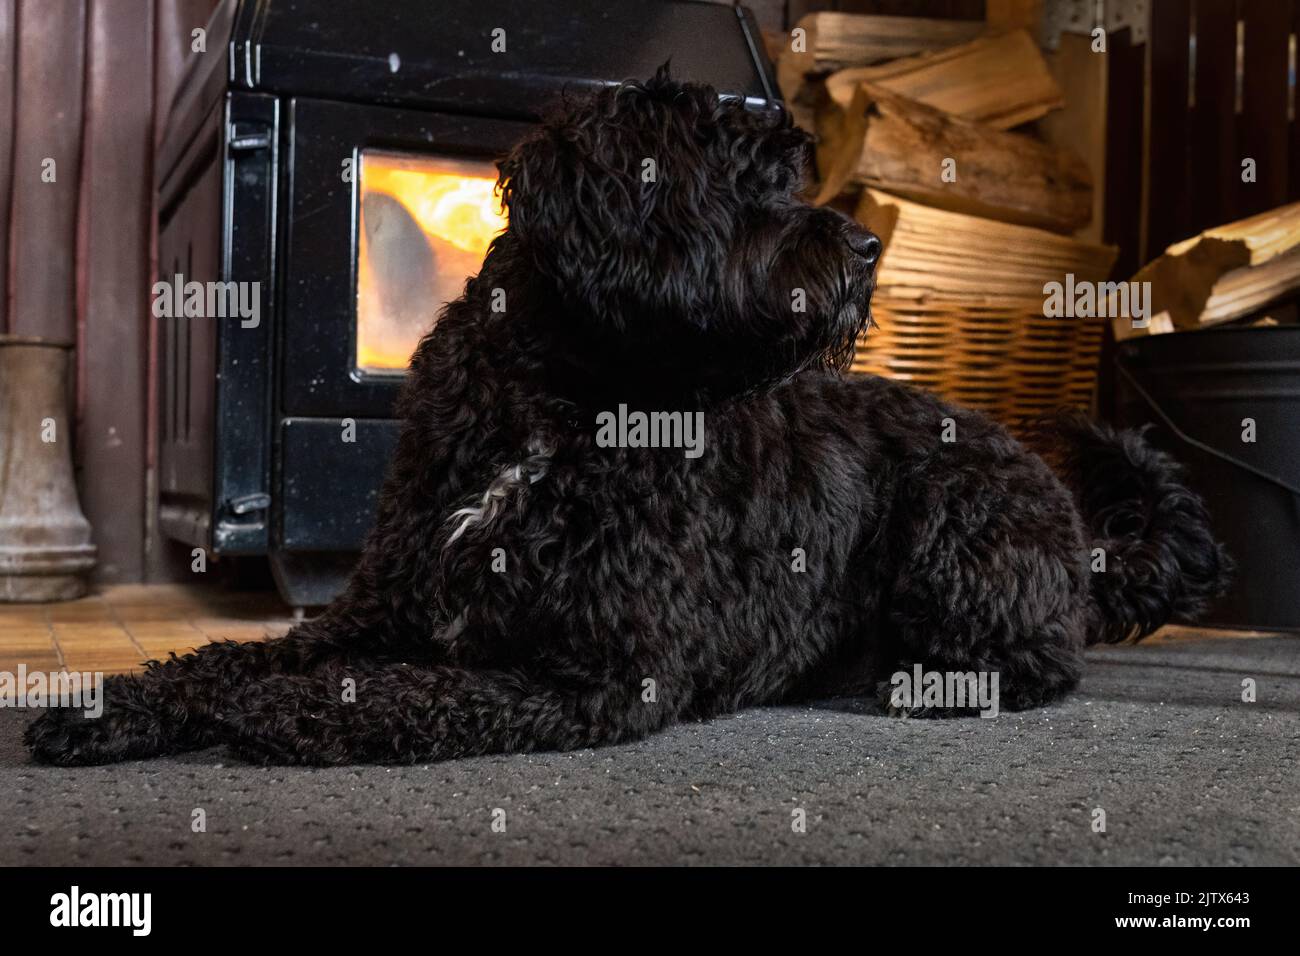 A black dog sitting in front of a fireplace at cosy home. Concept of warm home in winter. Stock Photo